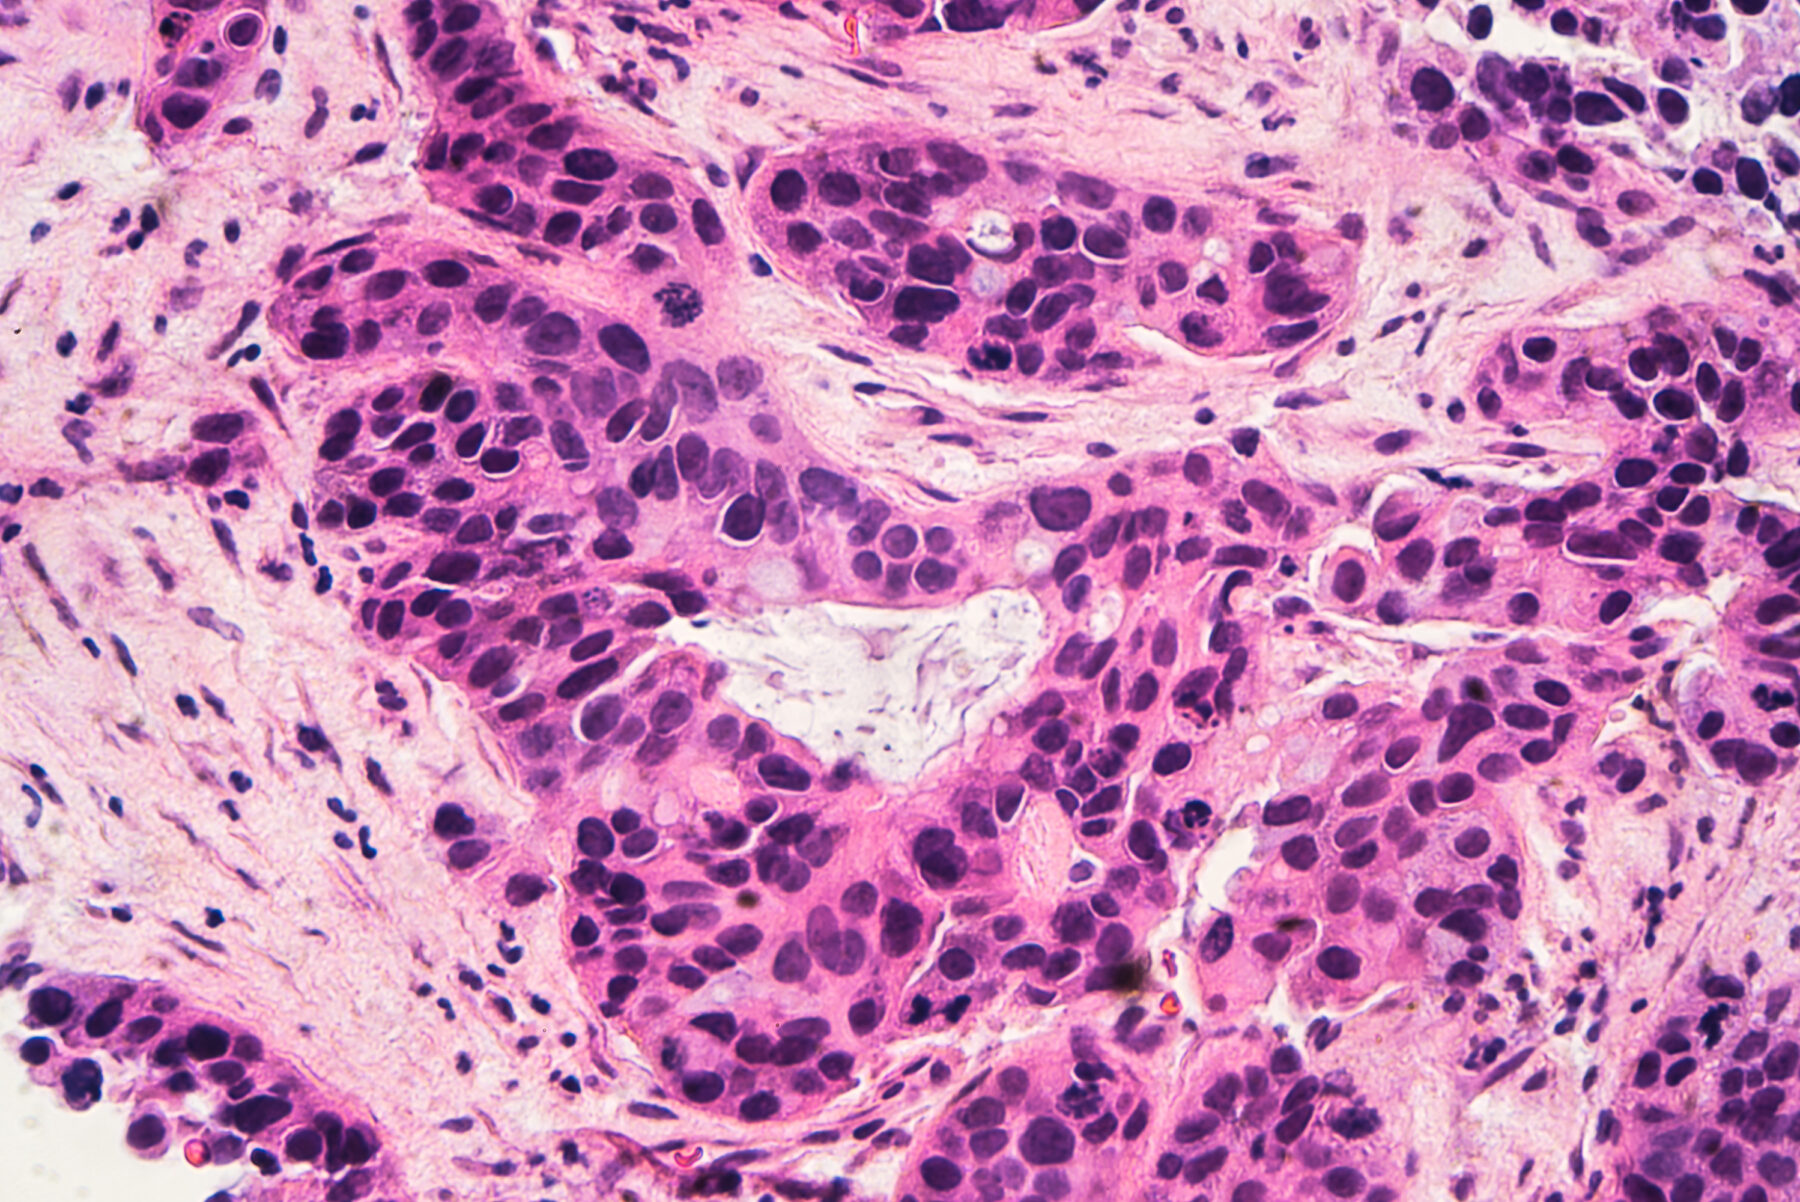 Breast cancer cells taken as part of a biopsy shown under the microscope